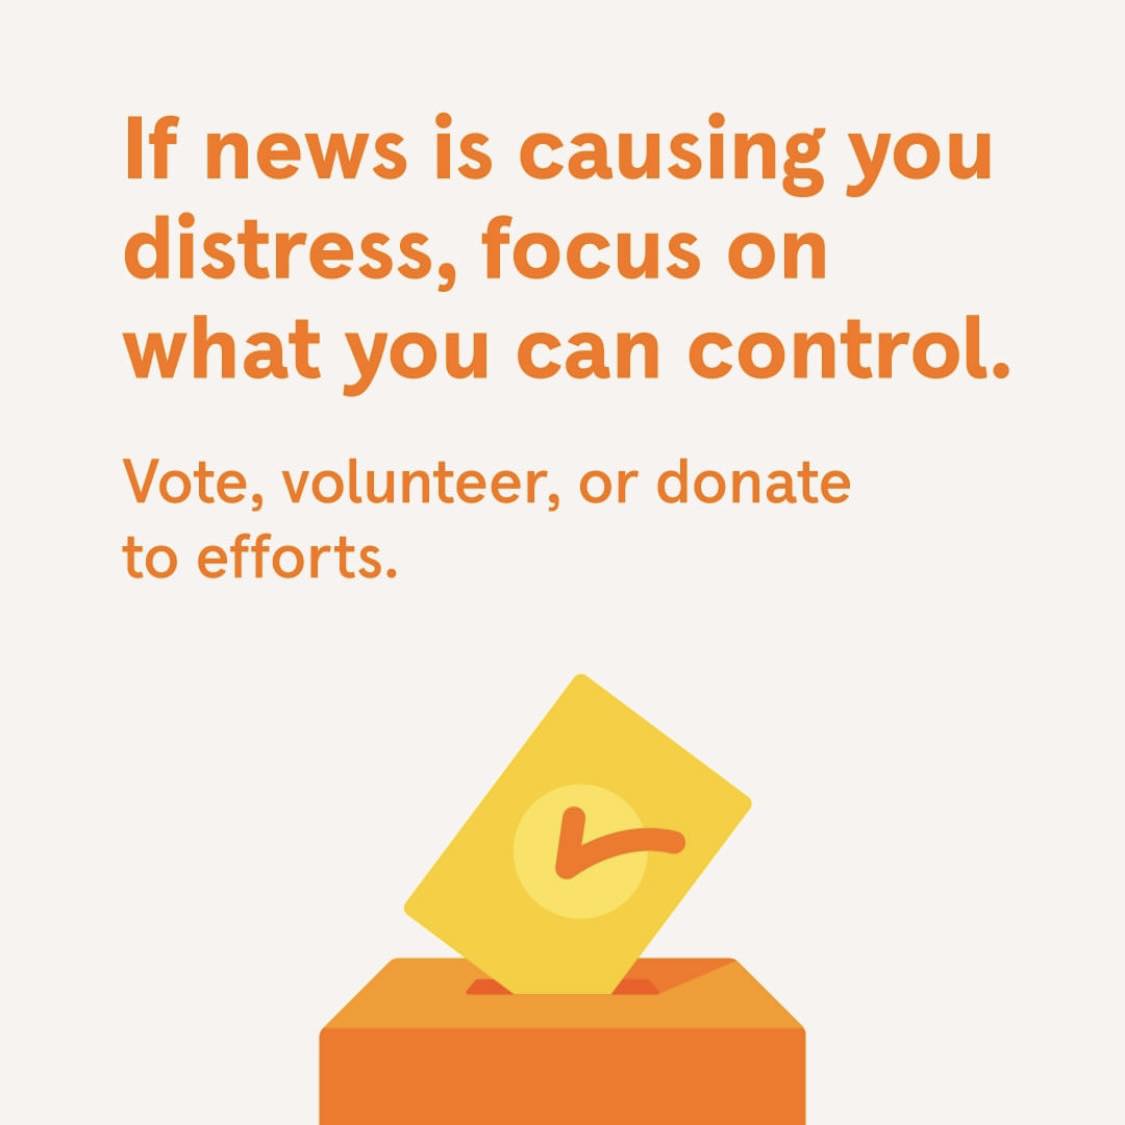 If the news is causing you distress, focus on what you can control. Vote, volunteer, or donate to efforts. Image: @Headspace